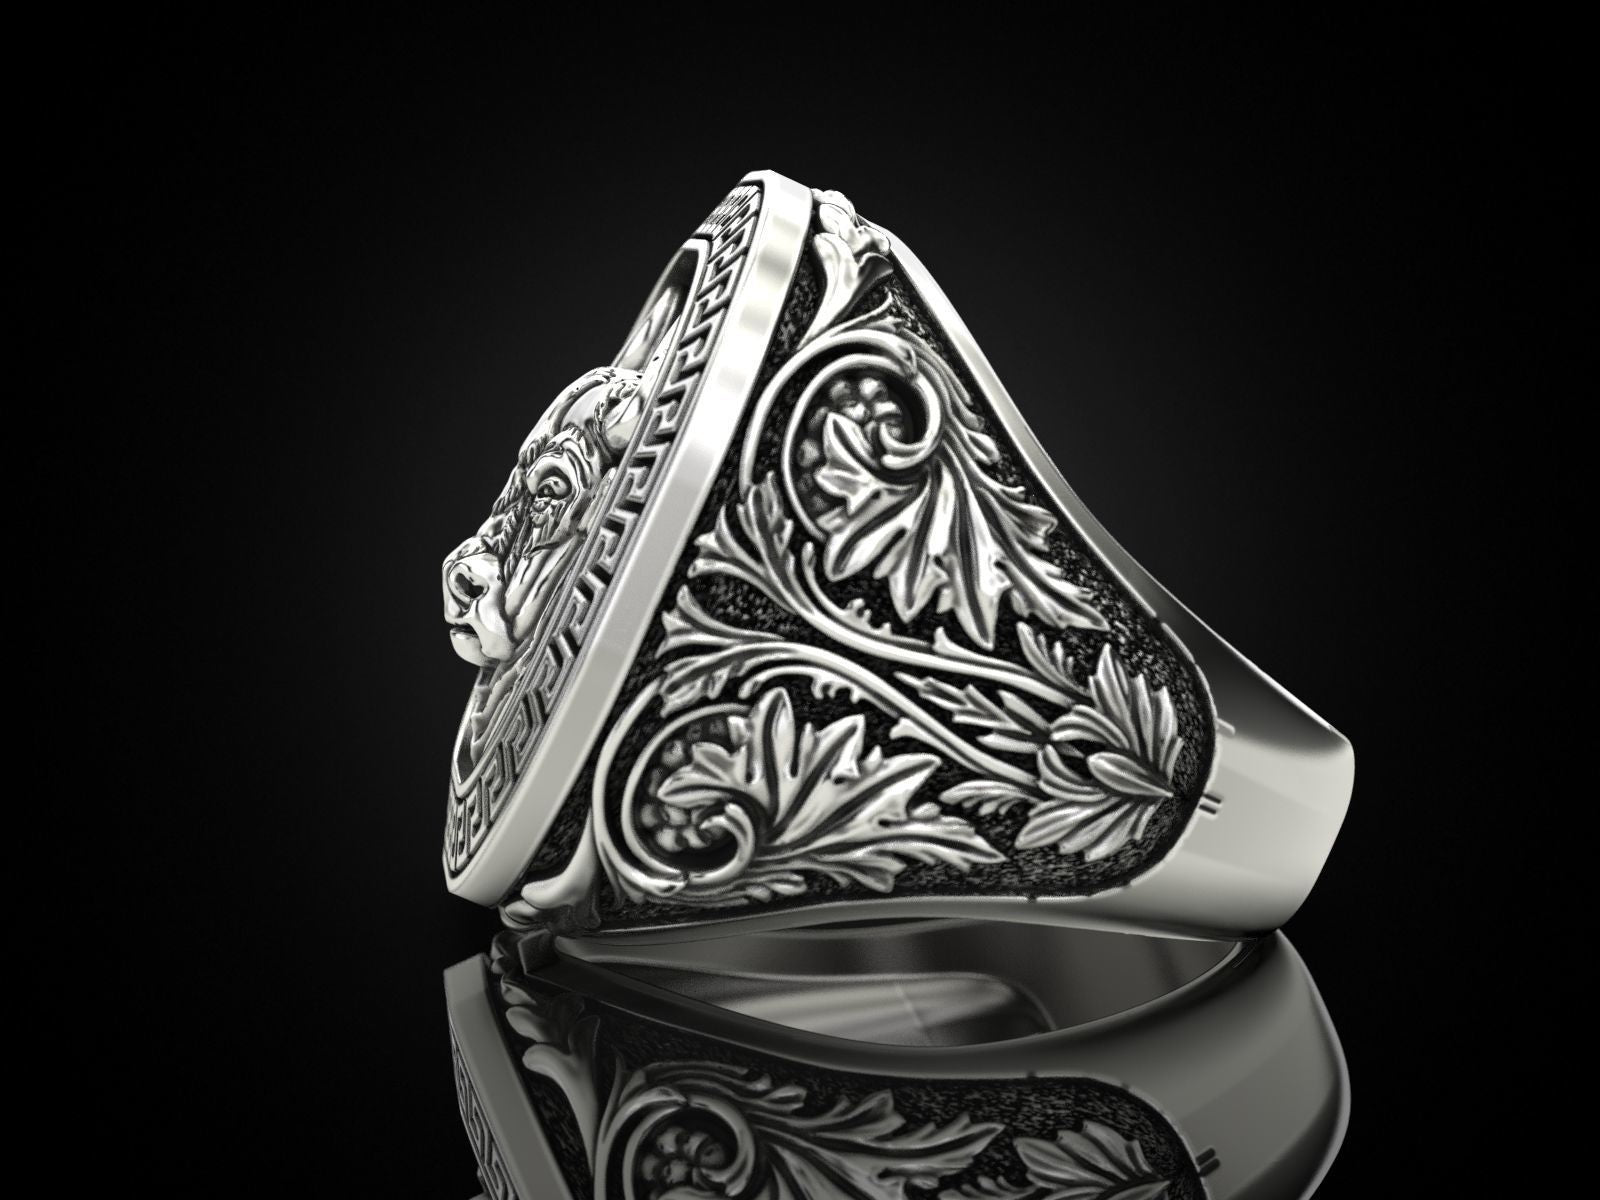 RARE PRINCE by CARAT SUTRA | Unique Taurus Zodiac Designed Bull Ring | 925 Sterling Silver Oxidized Ring | Men's Jewelry | With Certificate of Authenticity and 925 Hallmark - caratsutra